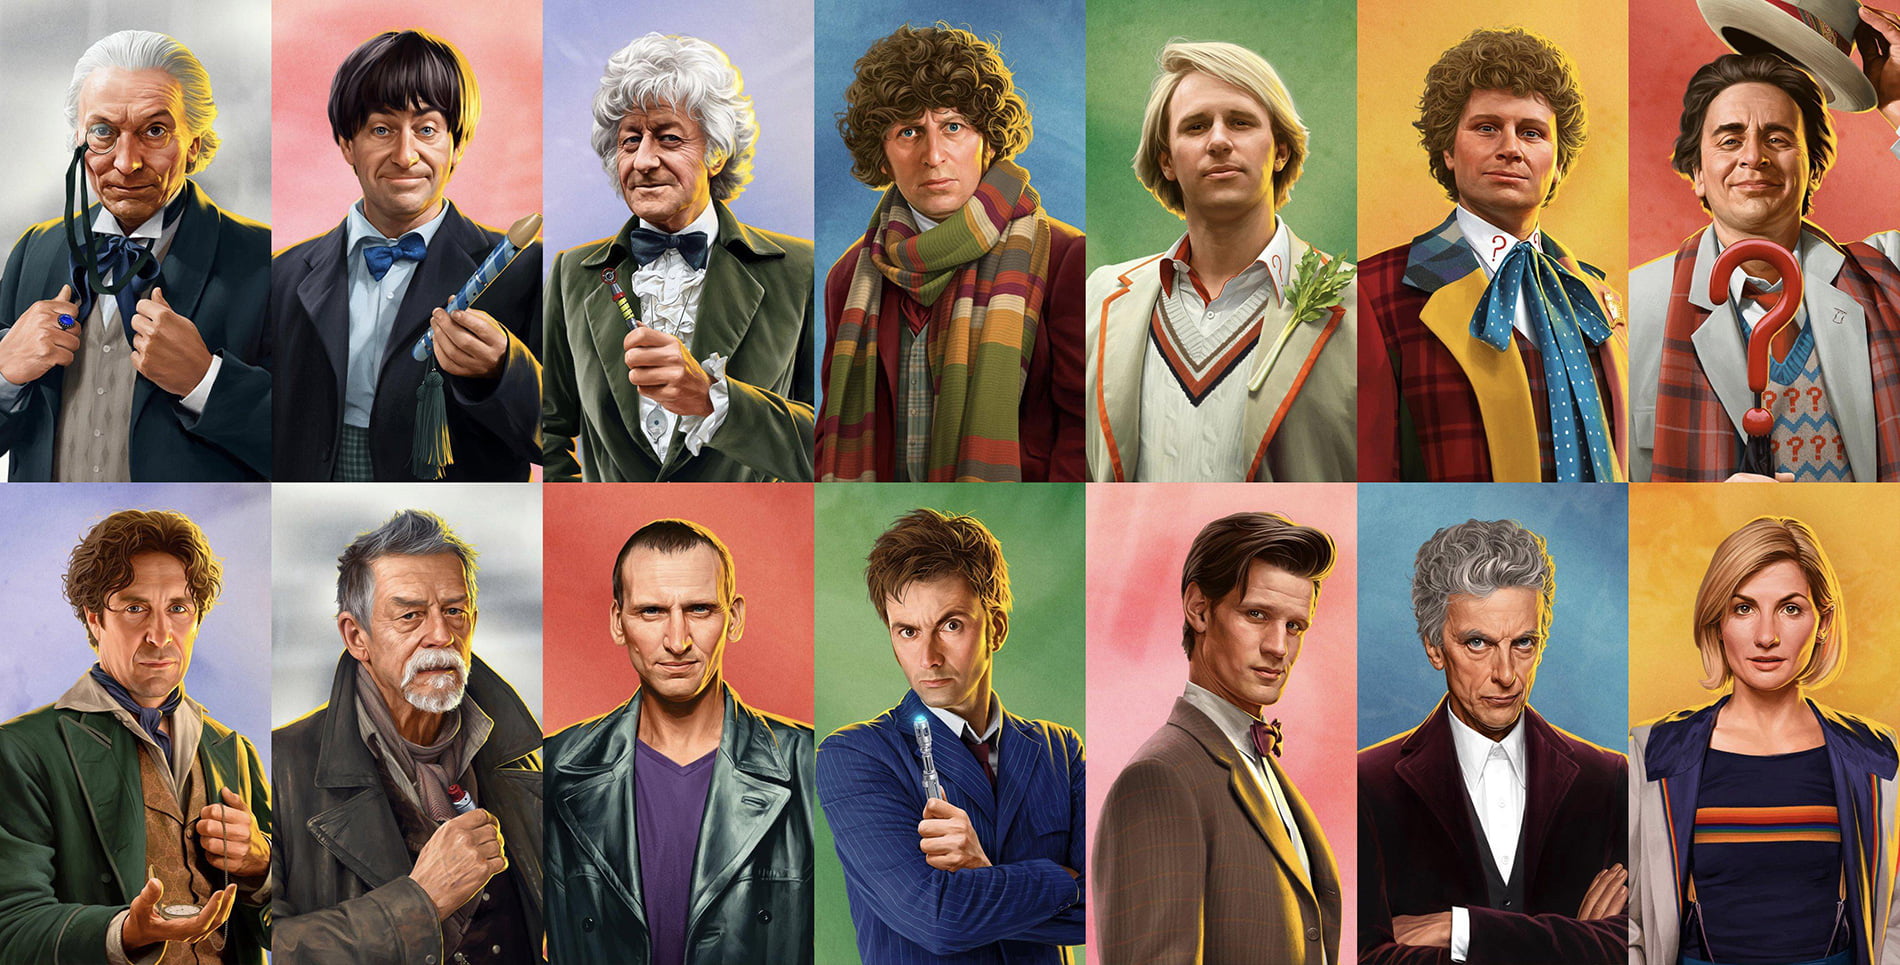 Who is the definitive Doctor Who